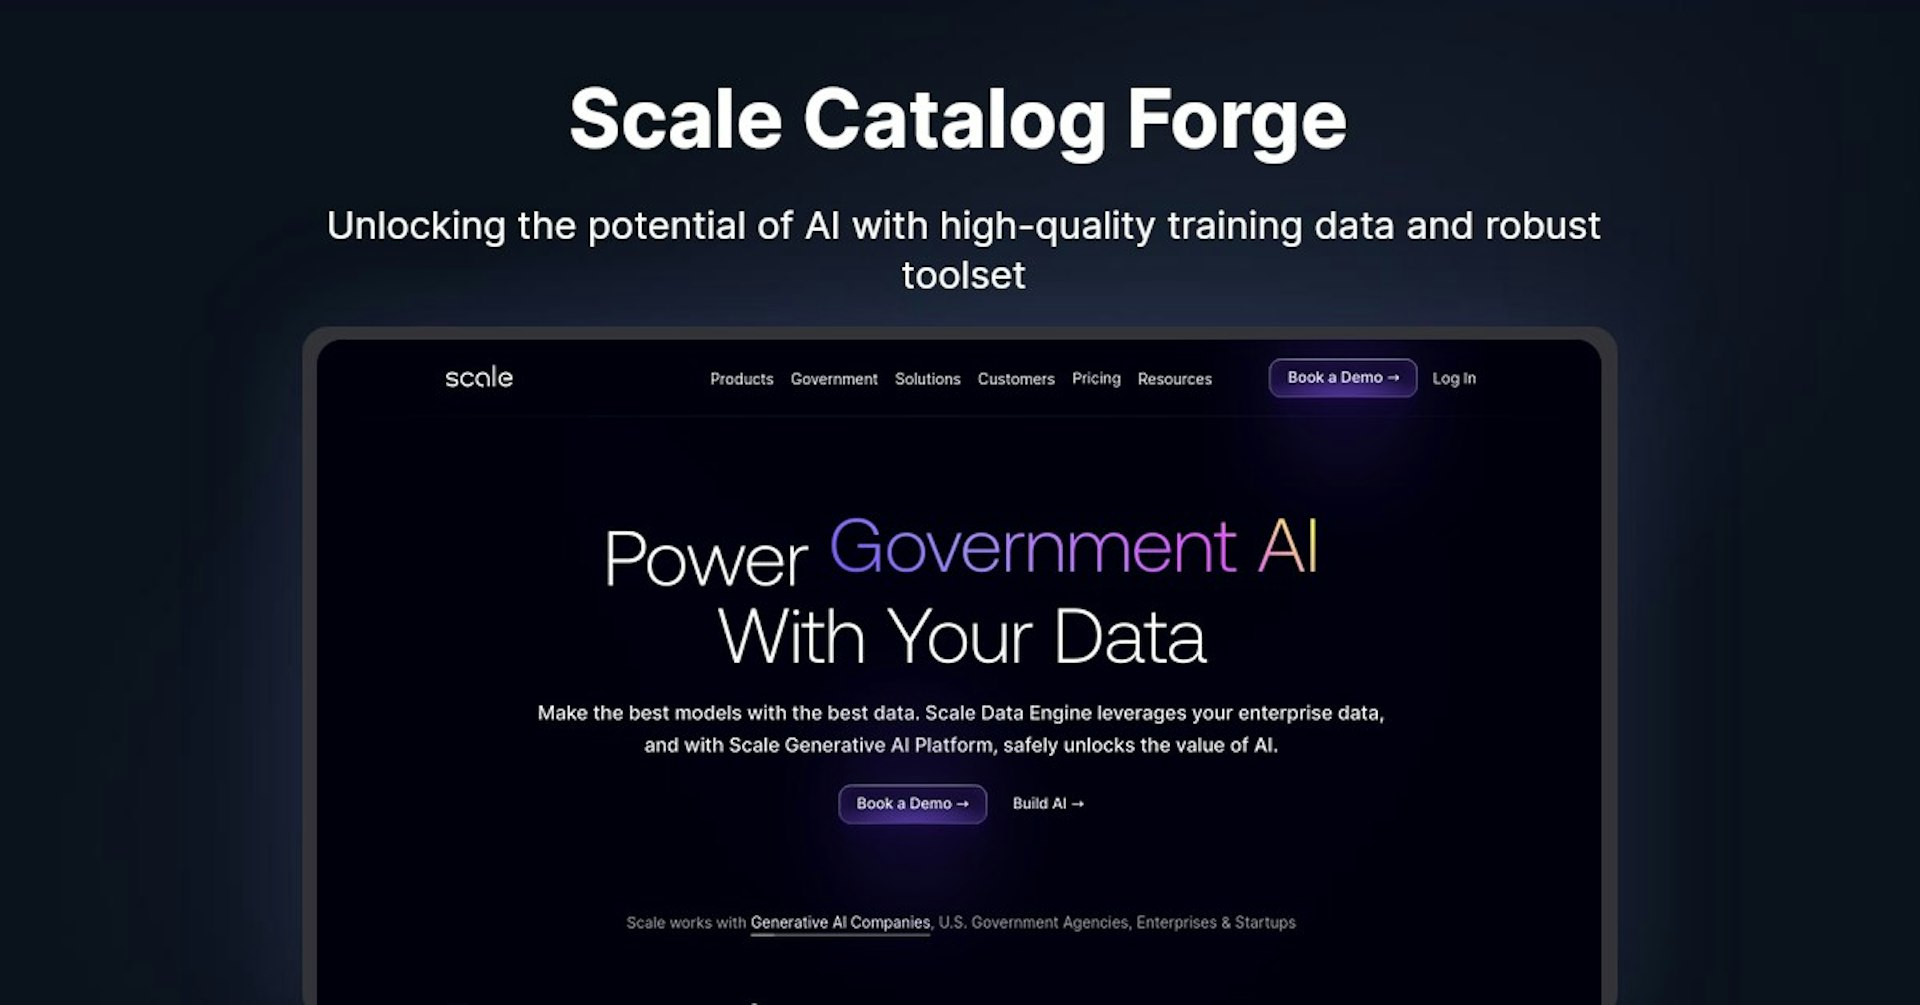 Scale Catalog Forge